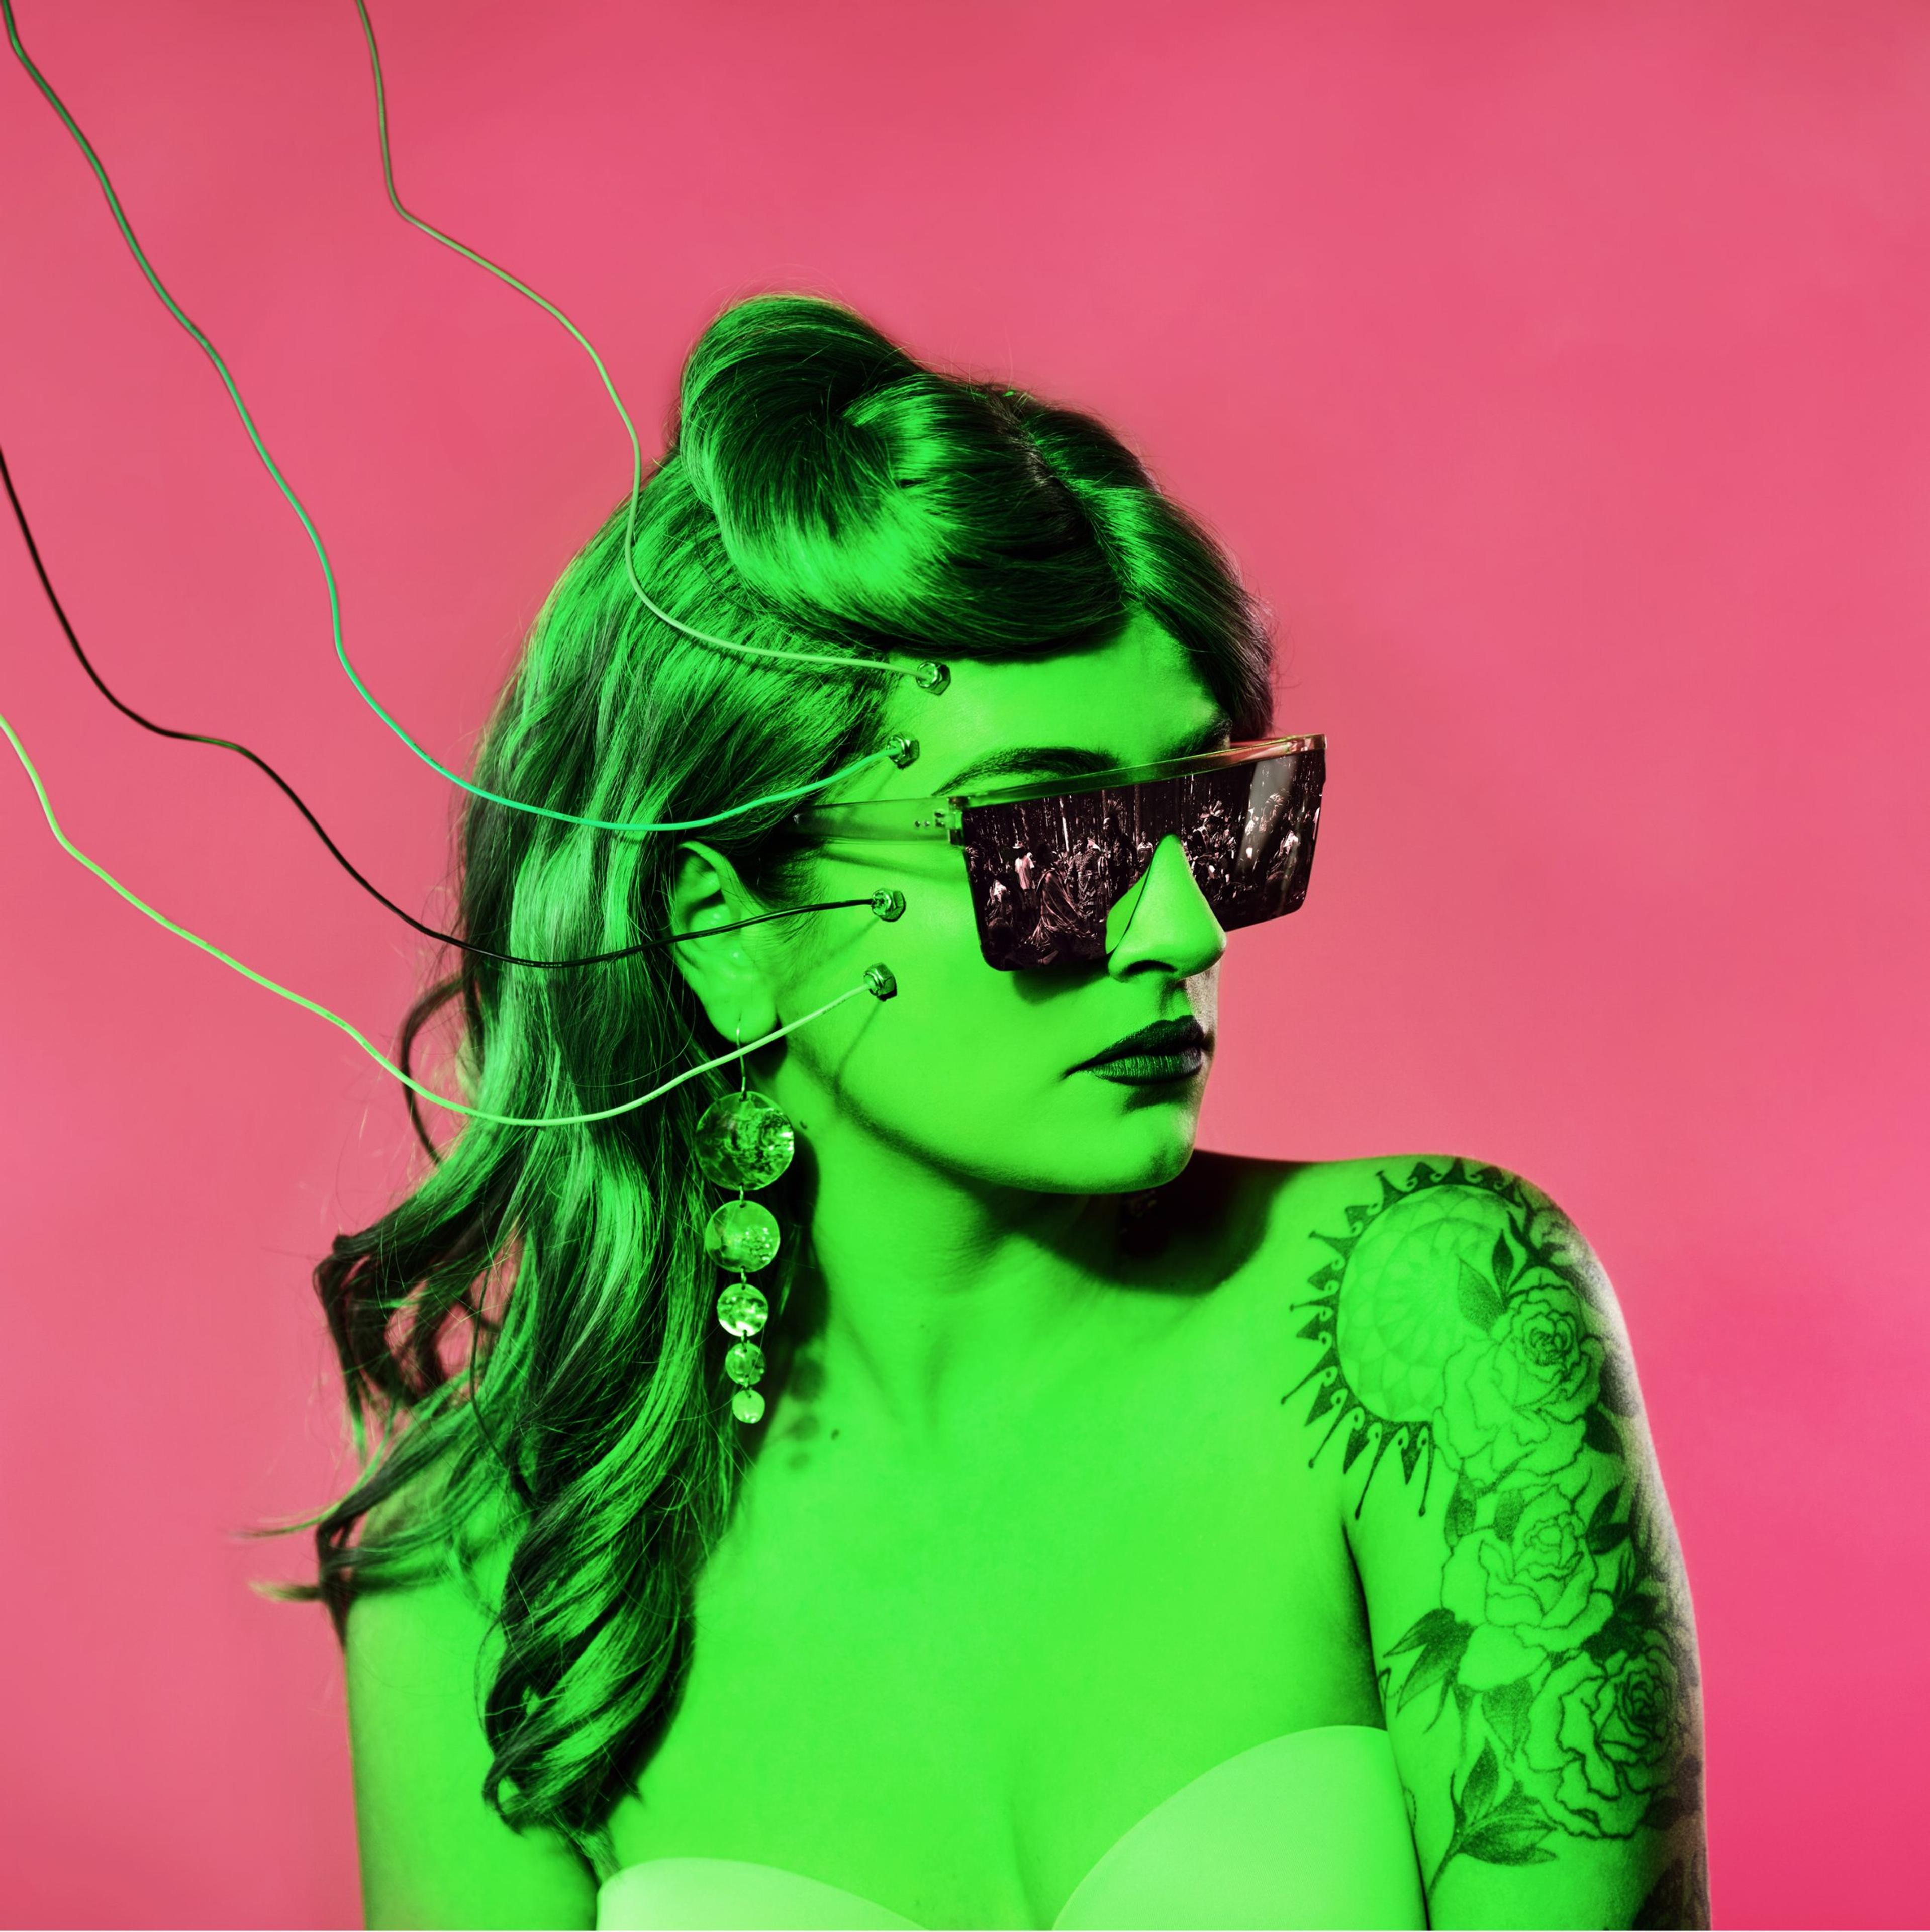 A photograph of a woman against a pink background, wearing sunglasses and illuminated by green lighting with electrodes attached to her face